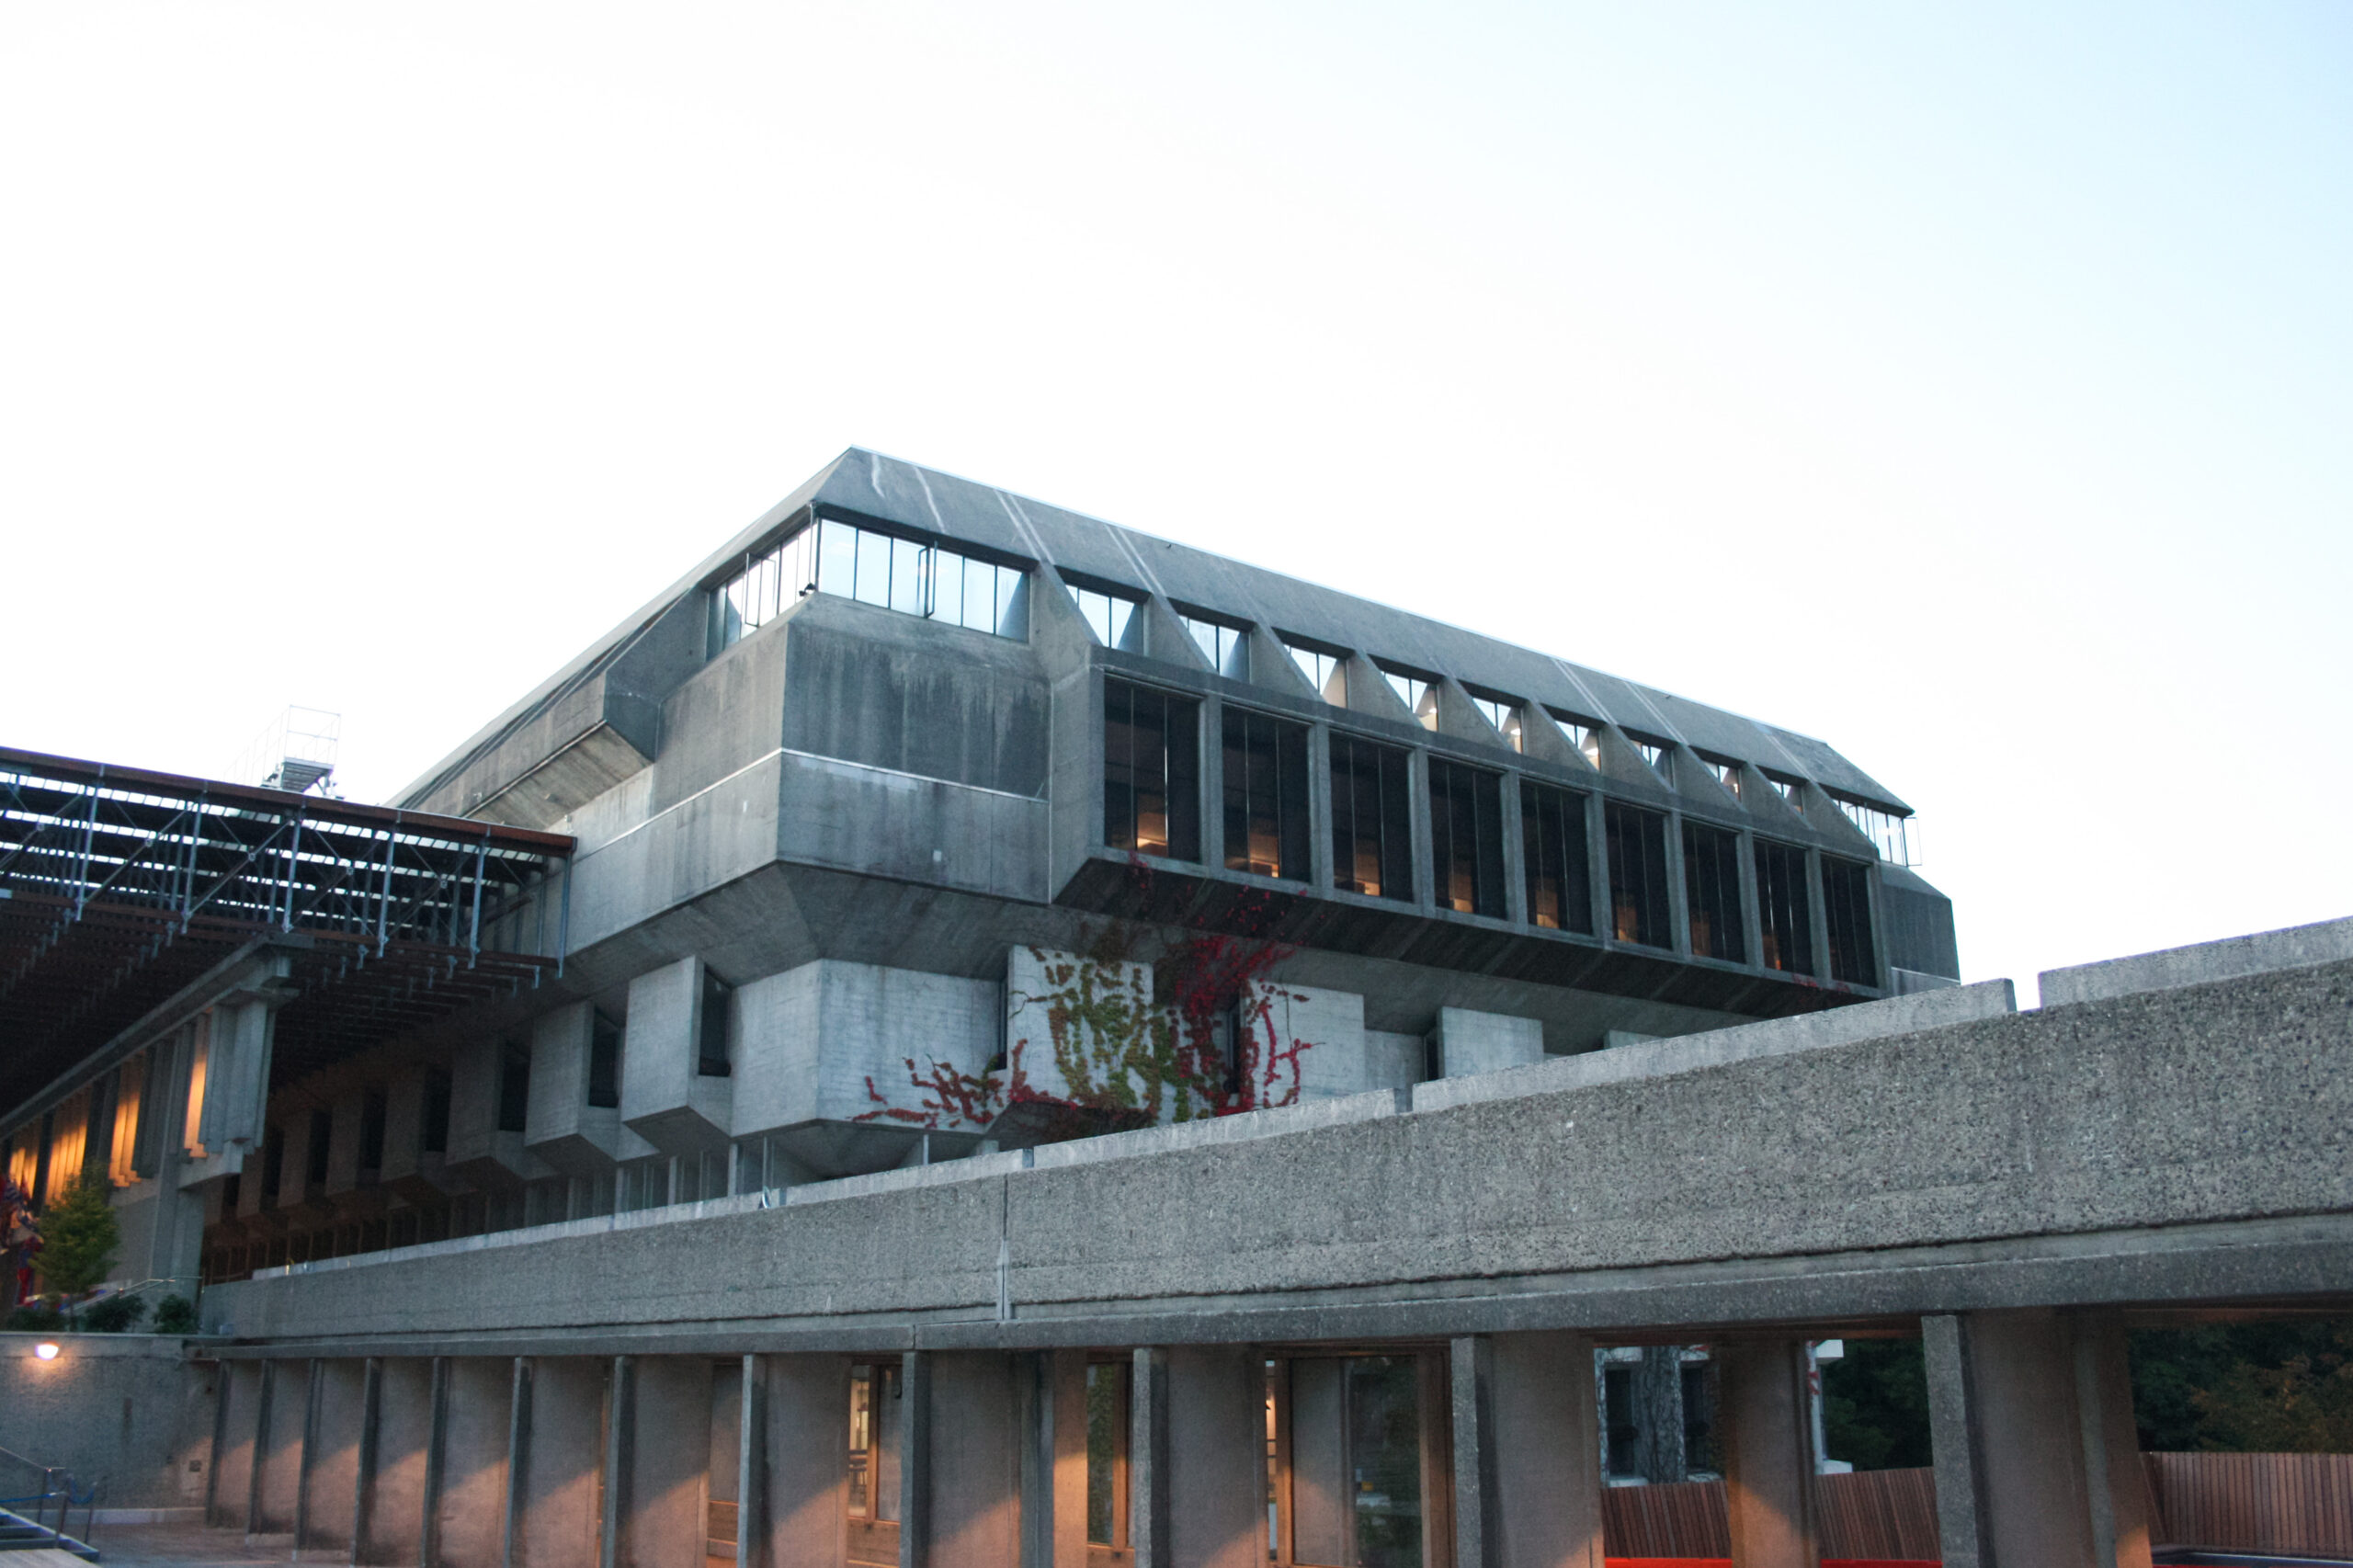 A photo of the WAC Bennett library, taken from the stairs leading to the AQ. The day is overcast, accenting the gray of the concrete. SFU’s architecture is brutalist, and the image accents this incredibly well.